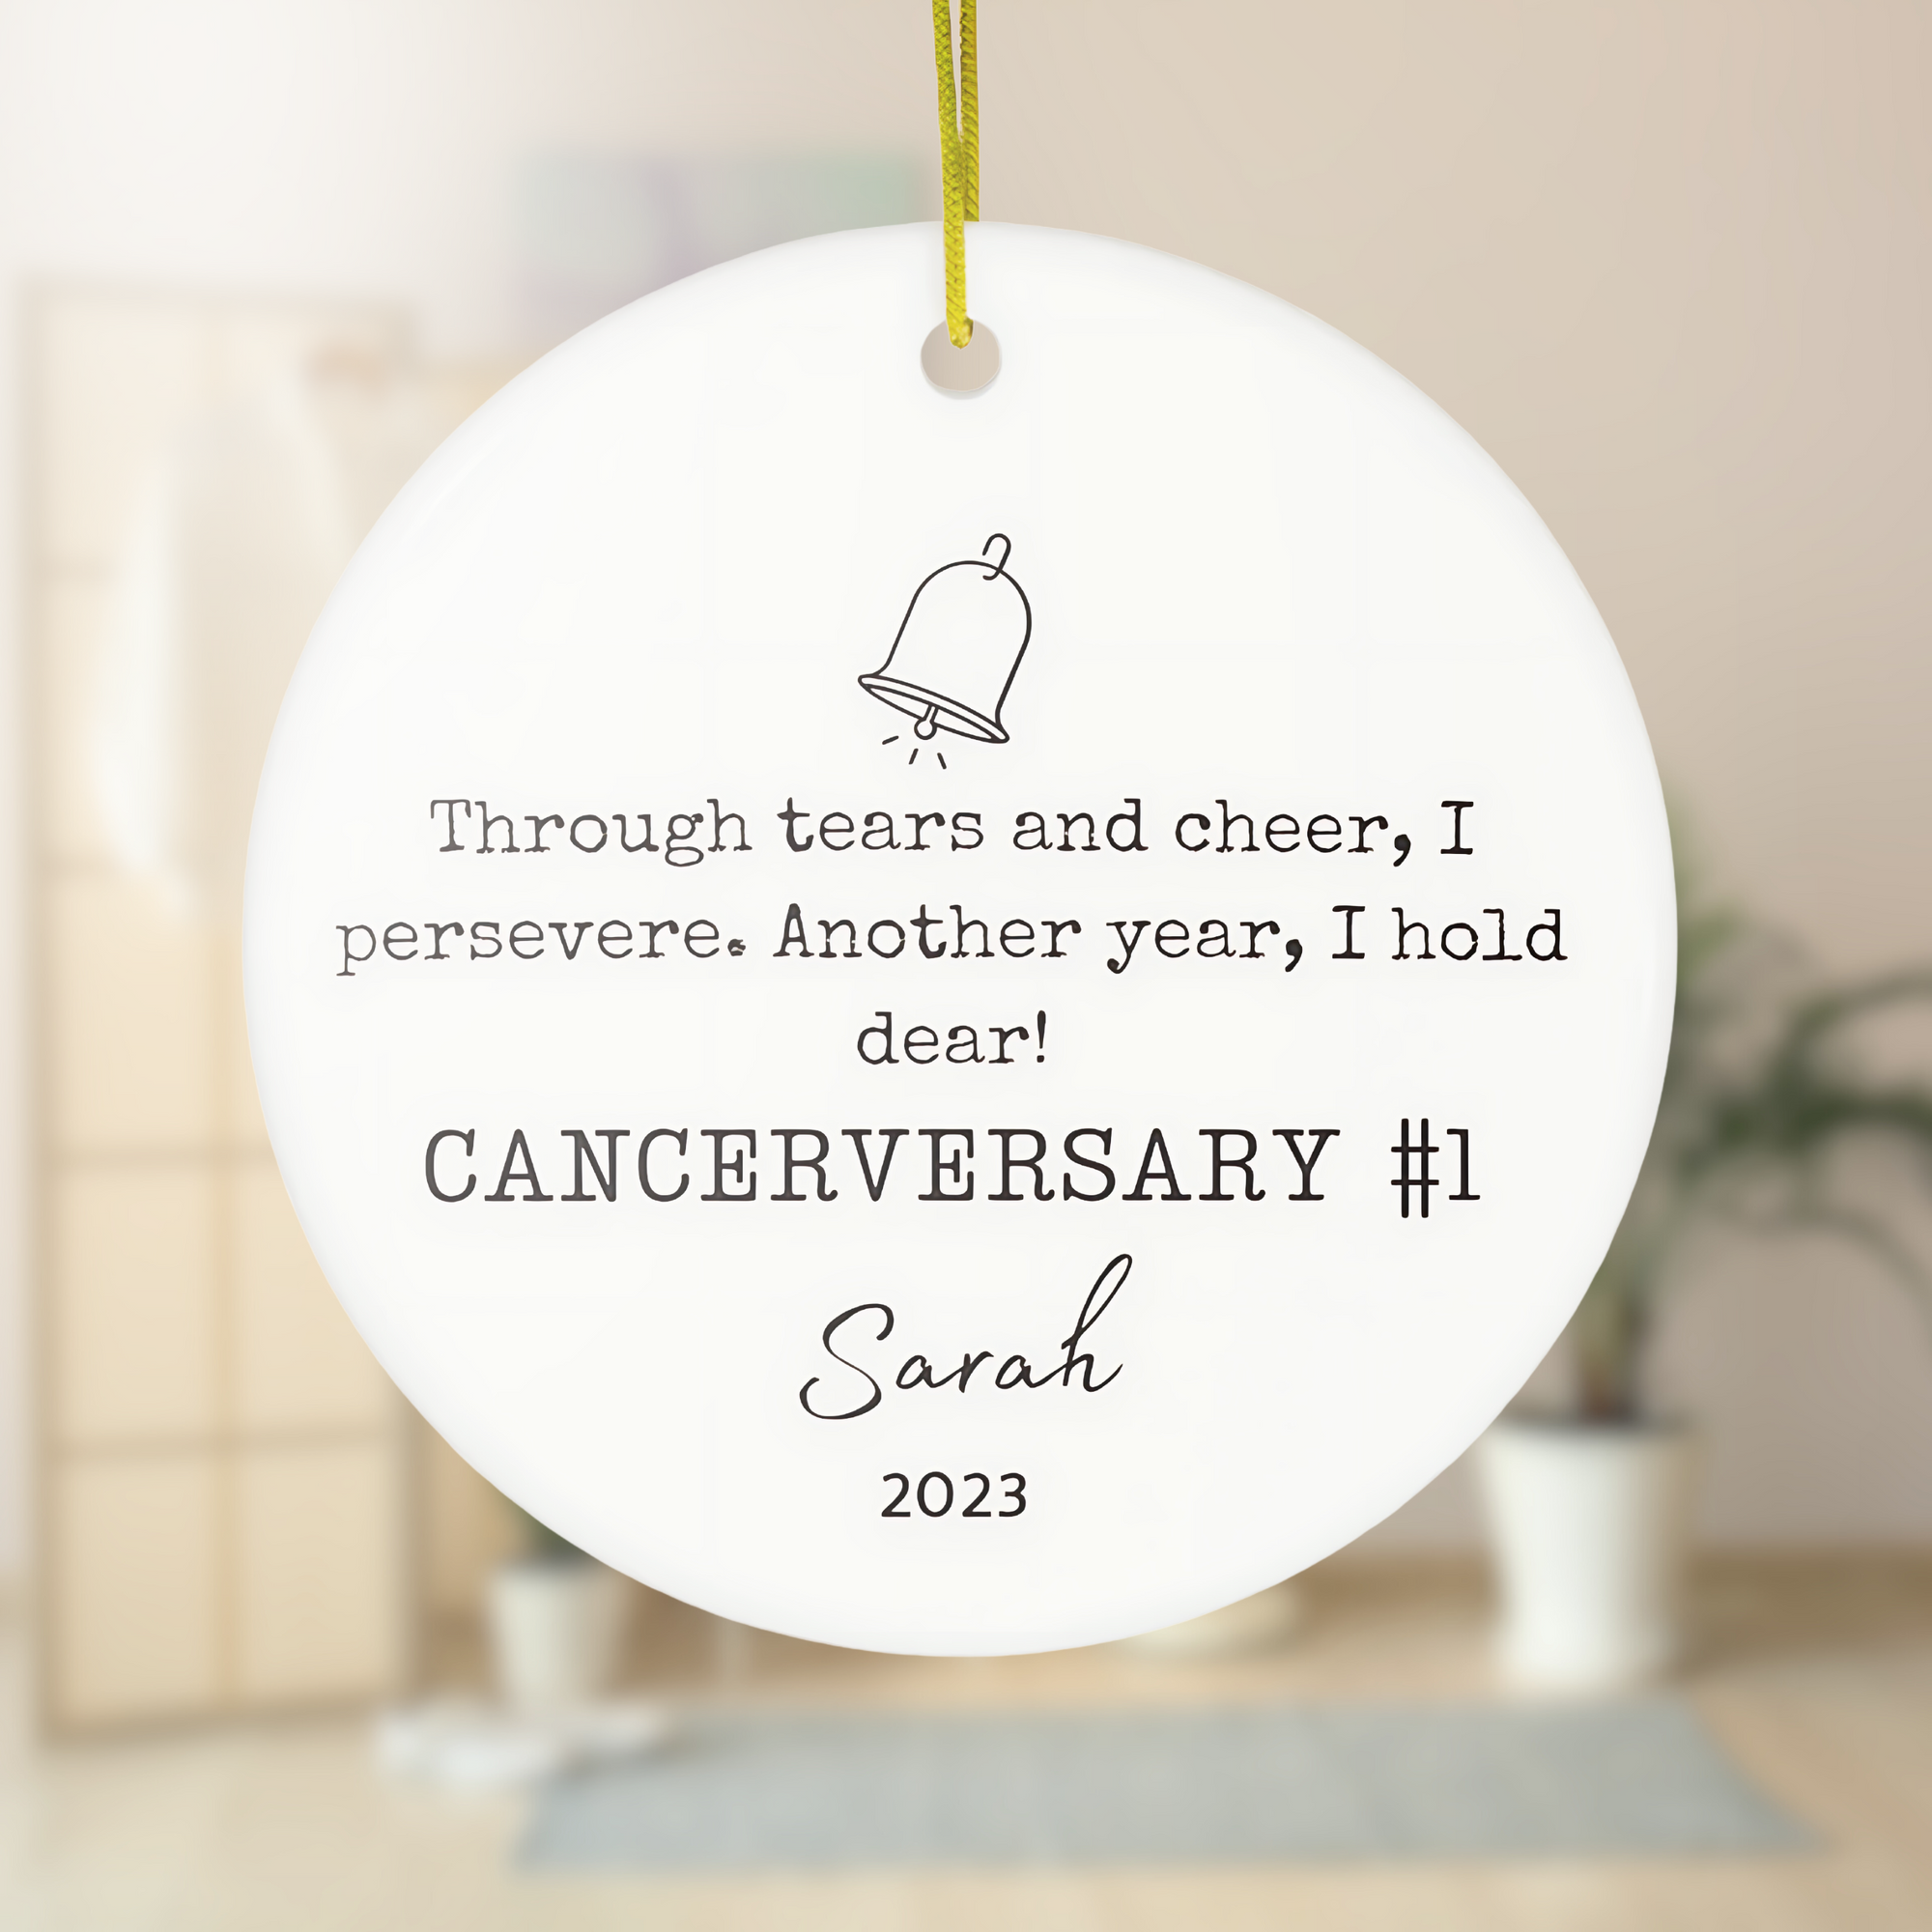 Personalized Ceramic Ornament, Cancerversary Bell